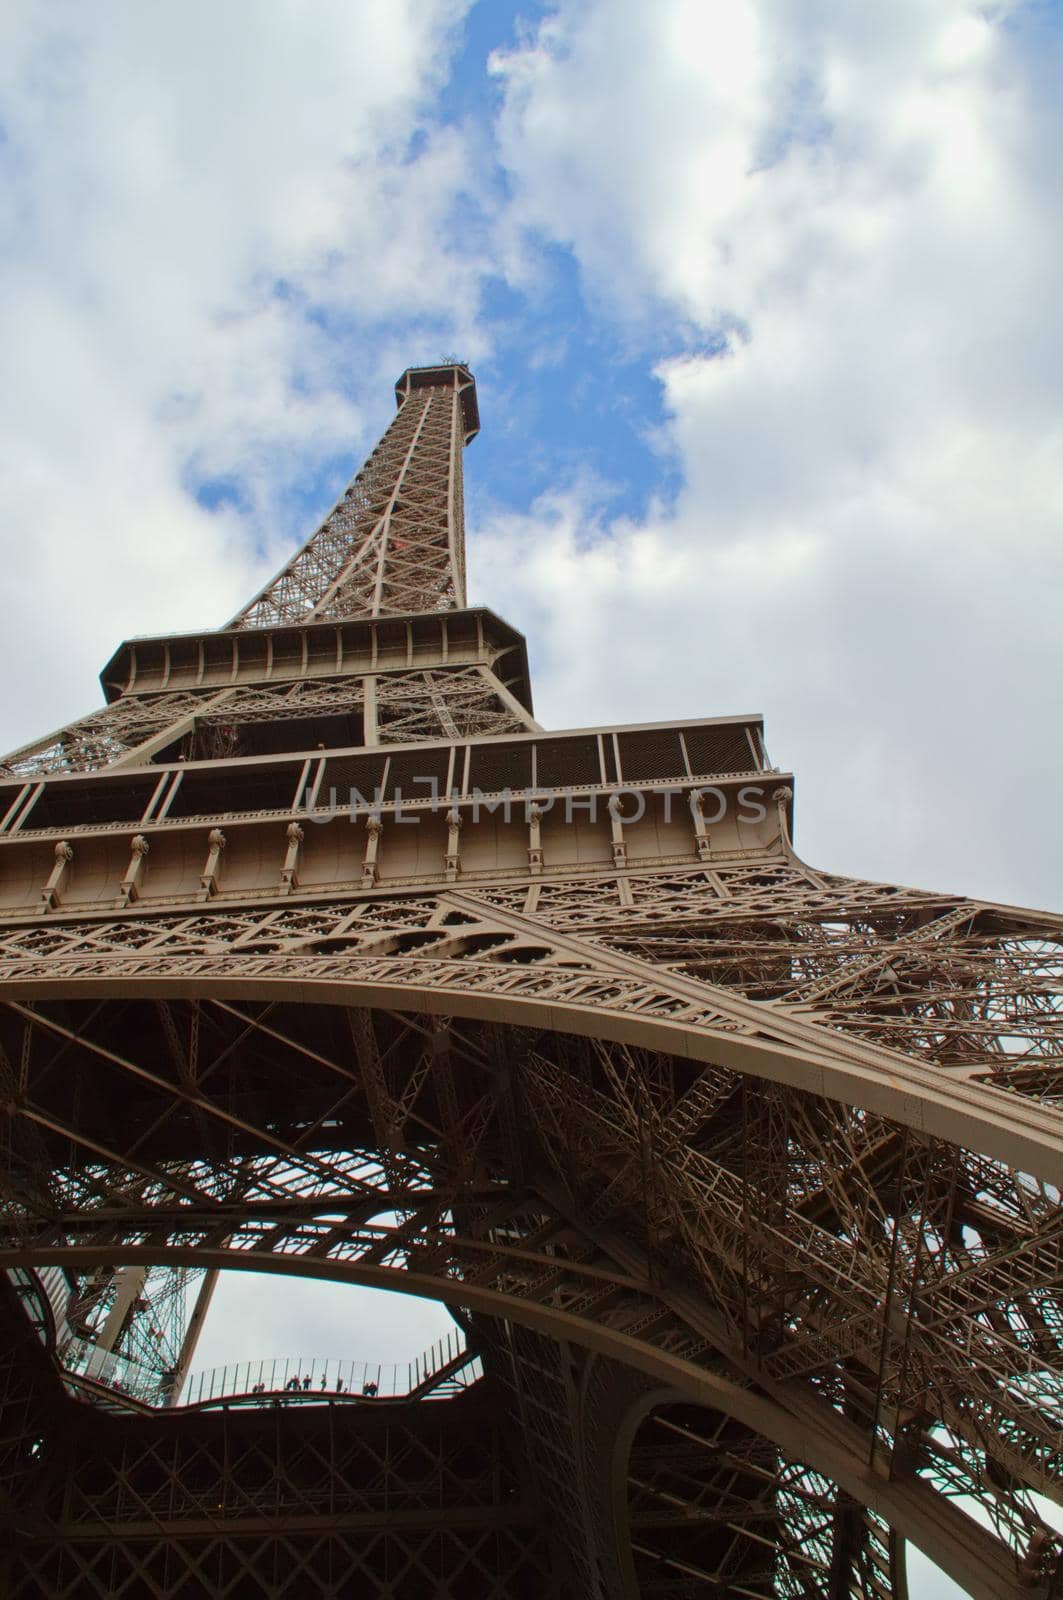 Low angle shot of the Eiffel Tower in Paris, France. by hernan_hyper